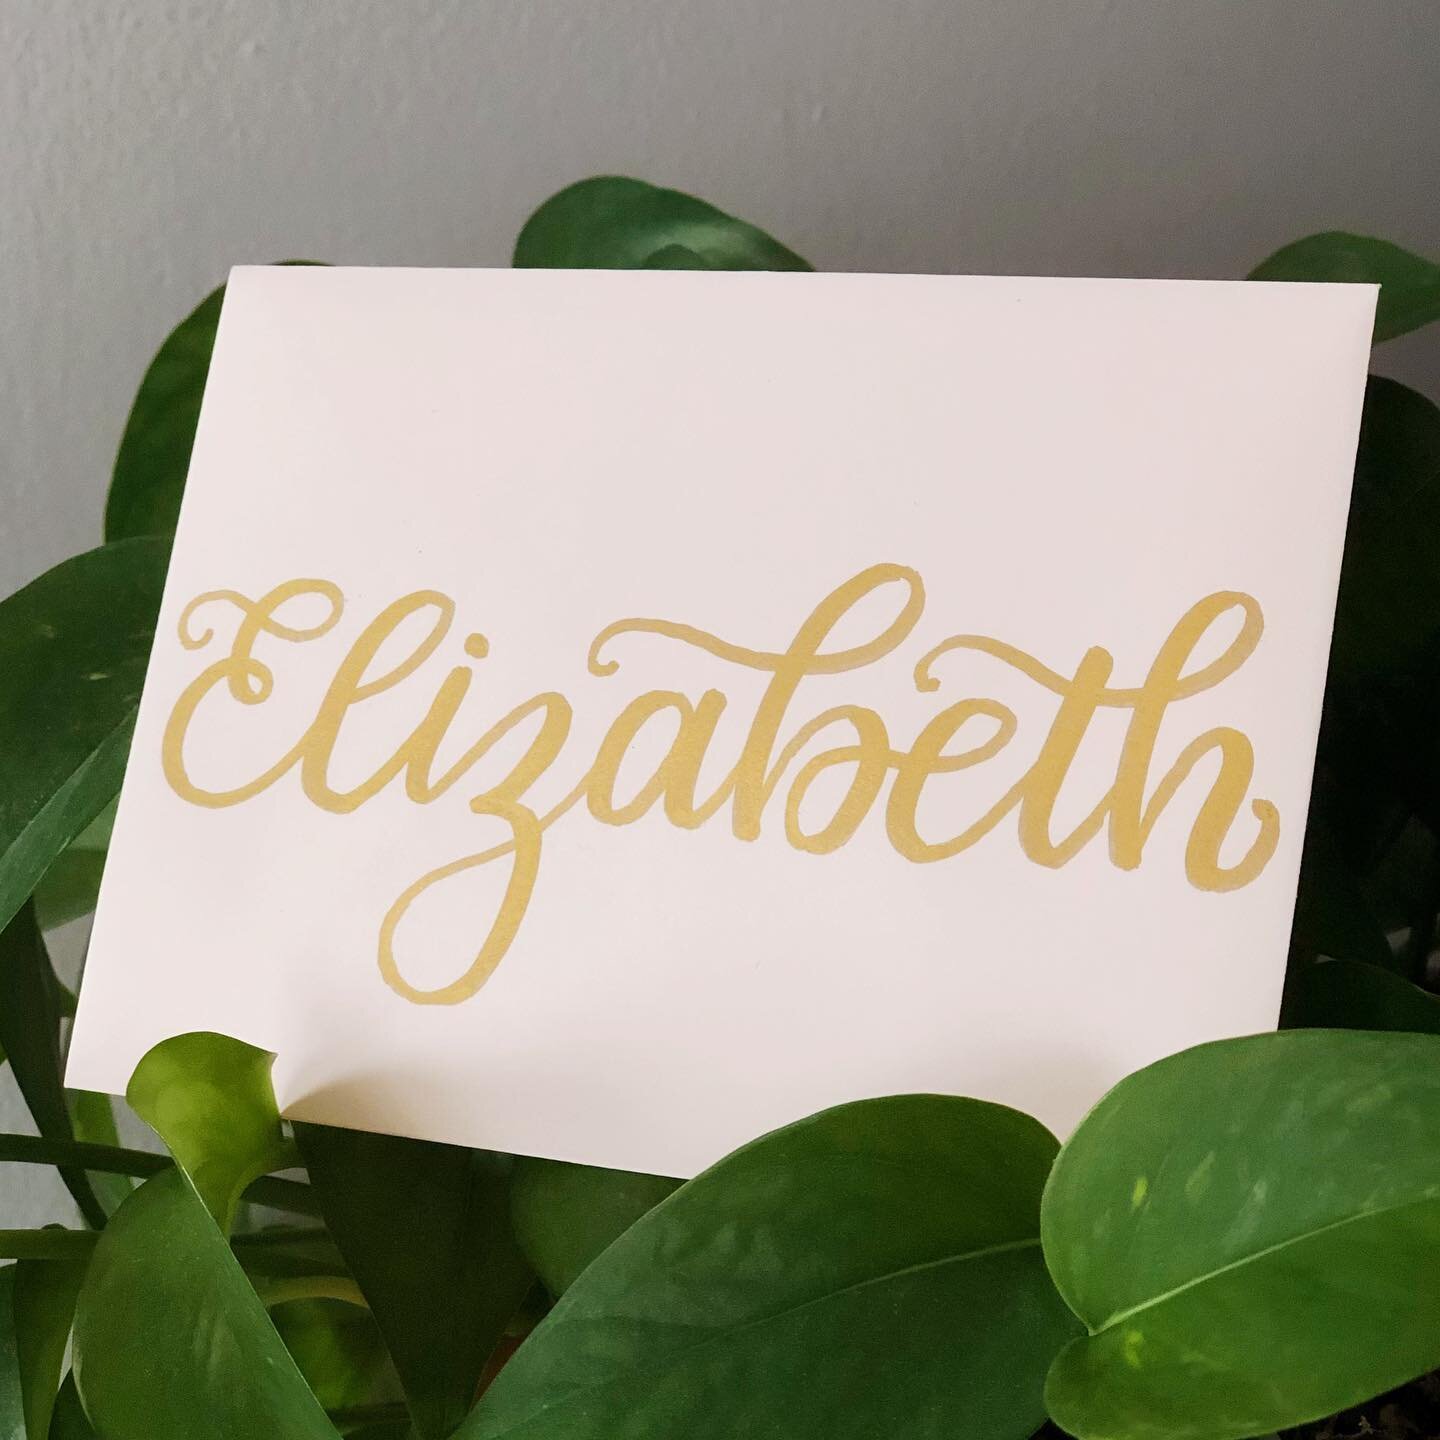 Hi everyone, hope you are all having an amazing day so far! 

I love this pink + gold combo so much! It&rsquo;s so elegant and makes me want to write all day 😍

Comment below if you&rsquo;d like to see more calligraphy on envelopes! 🙋&zwj;♀️💌
.
.
